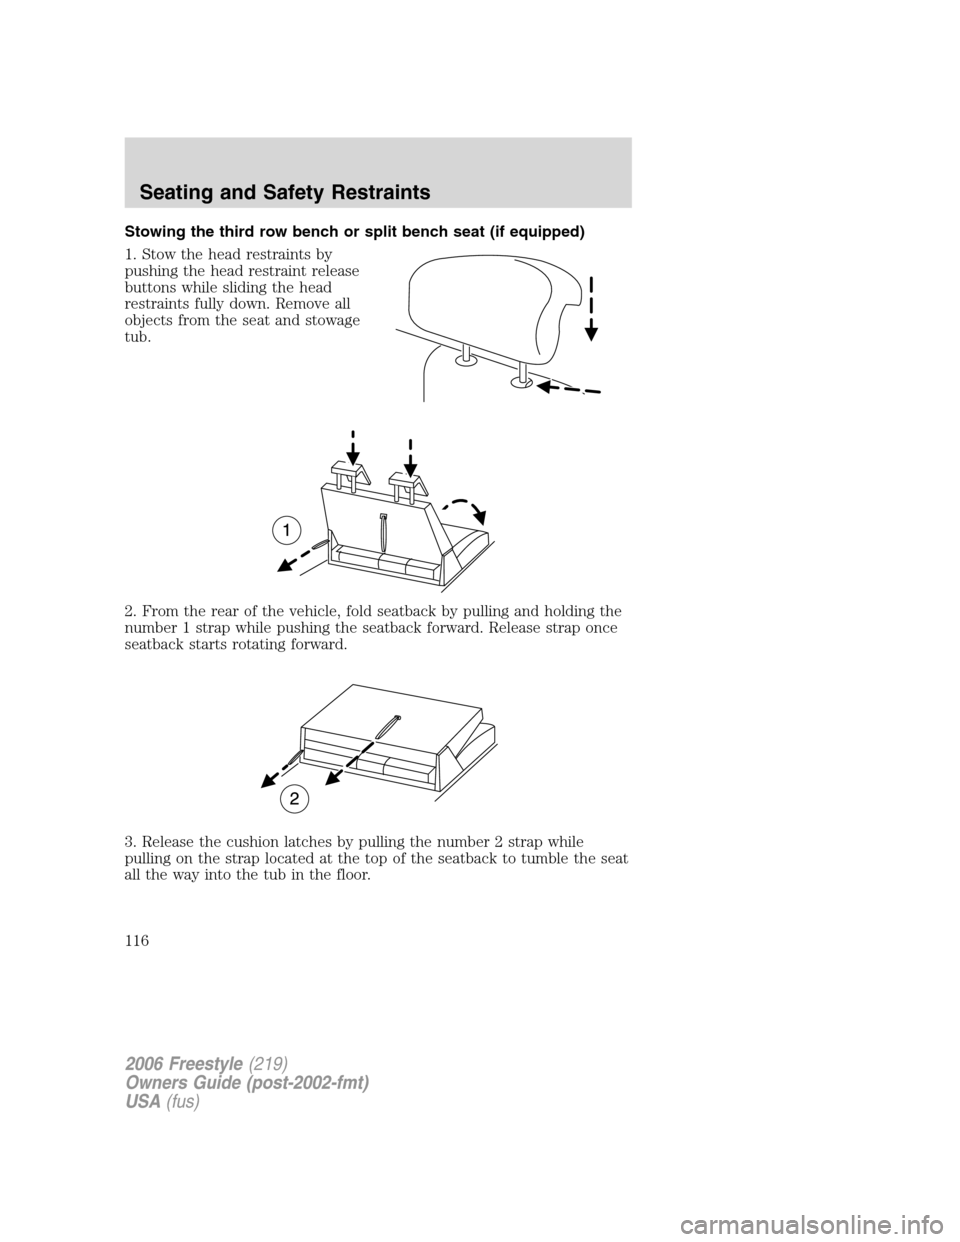 FORD FREESTYLE 2006 1.G Owners Manual Stowing the third row bench or split bench seat (if equipped)
1. Stow the head restraints by
pushing the head restraint release
buttons while sliding the head
restraints fully down. Remove all
objects